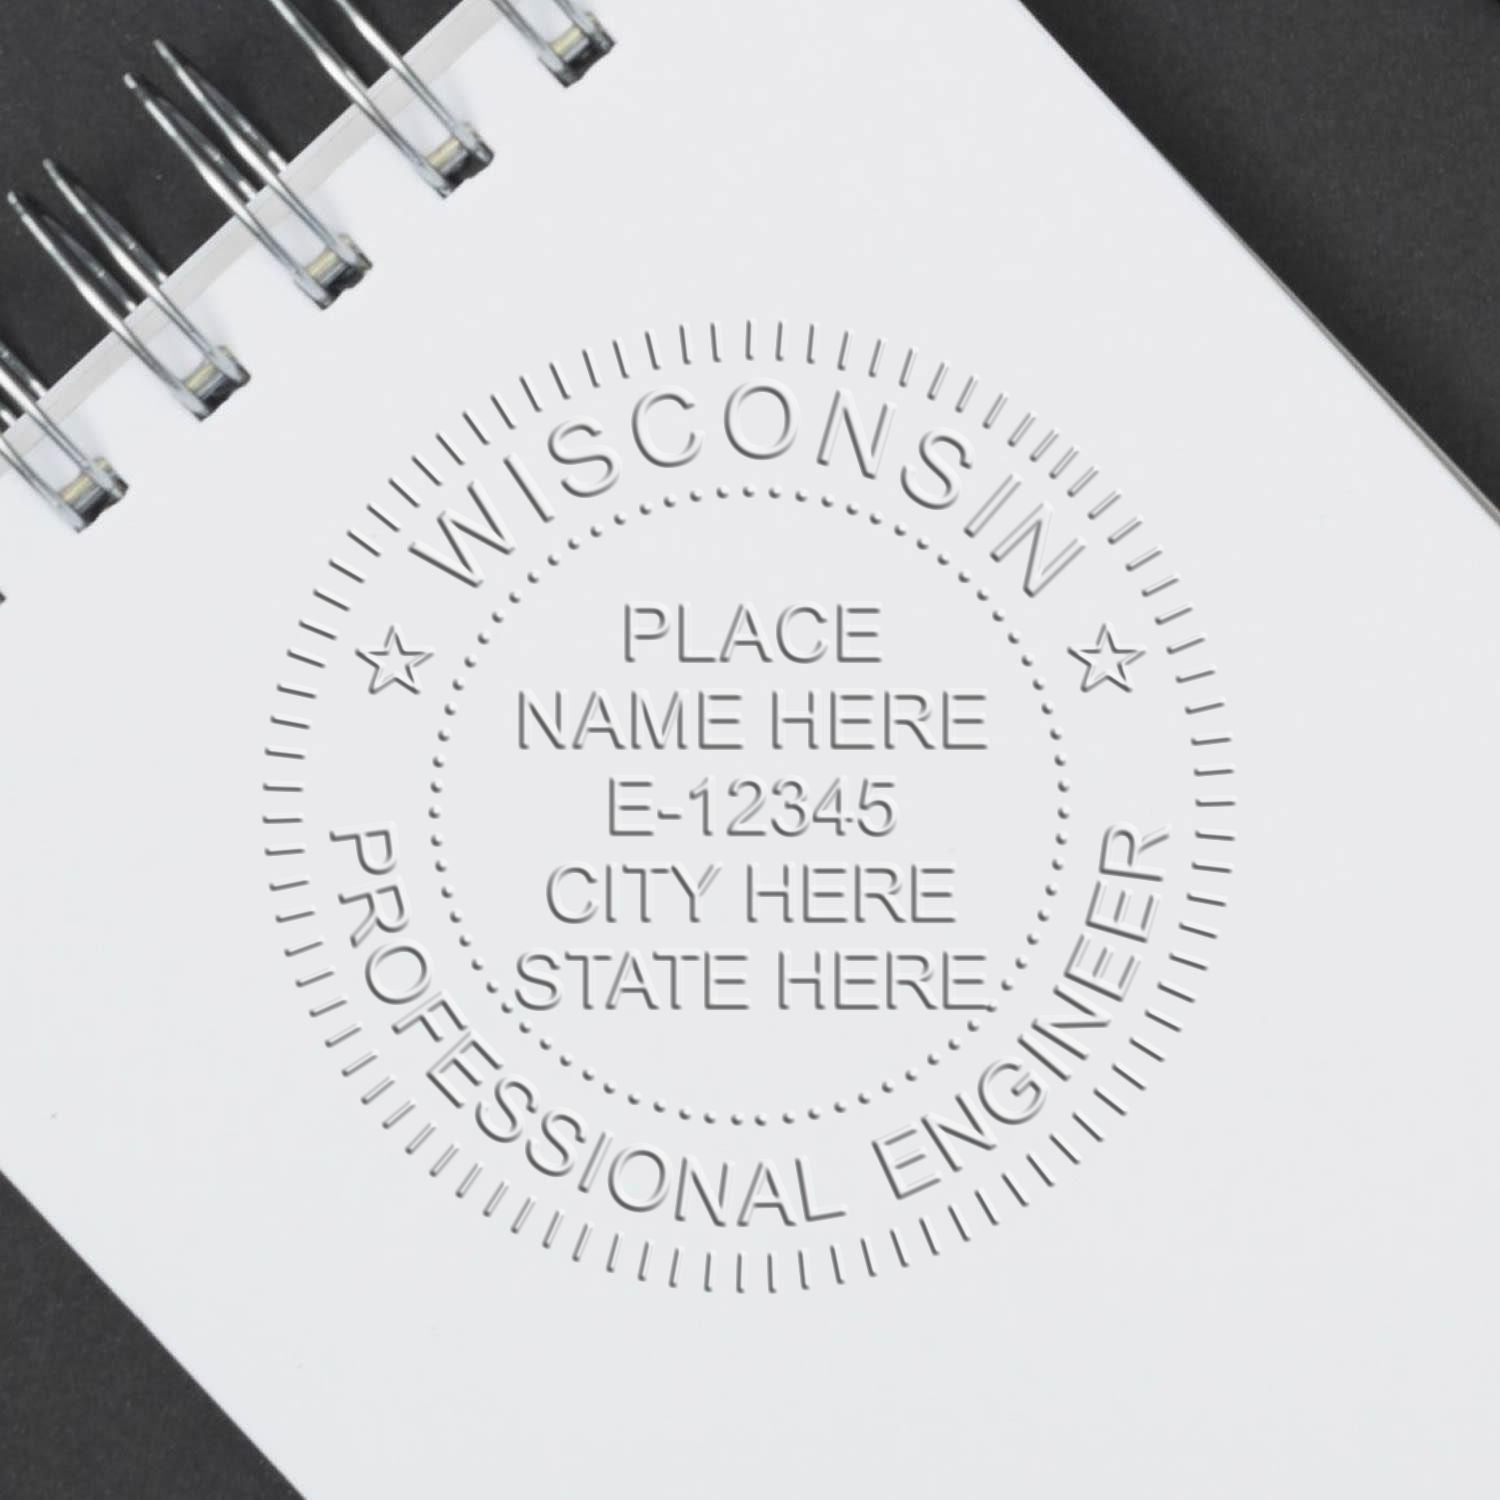 The Heavy Duty Cast Iron Wisconsin Engineer Seal Embosser stamp impression comes to life with a crisp, detailed photo on paper - showcasing true professional quality.